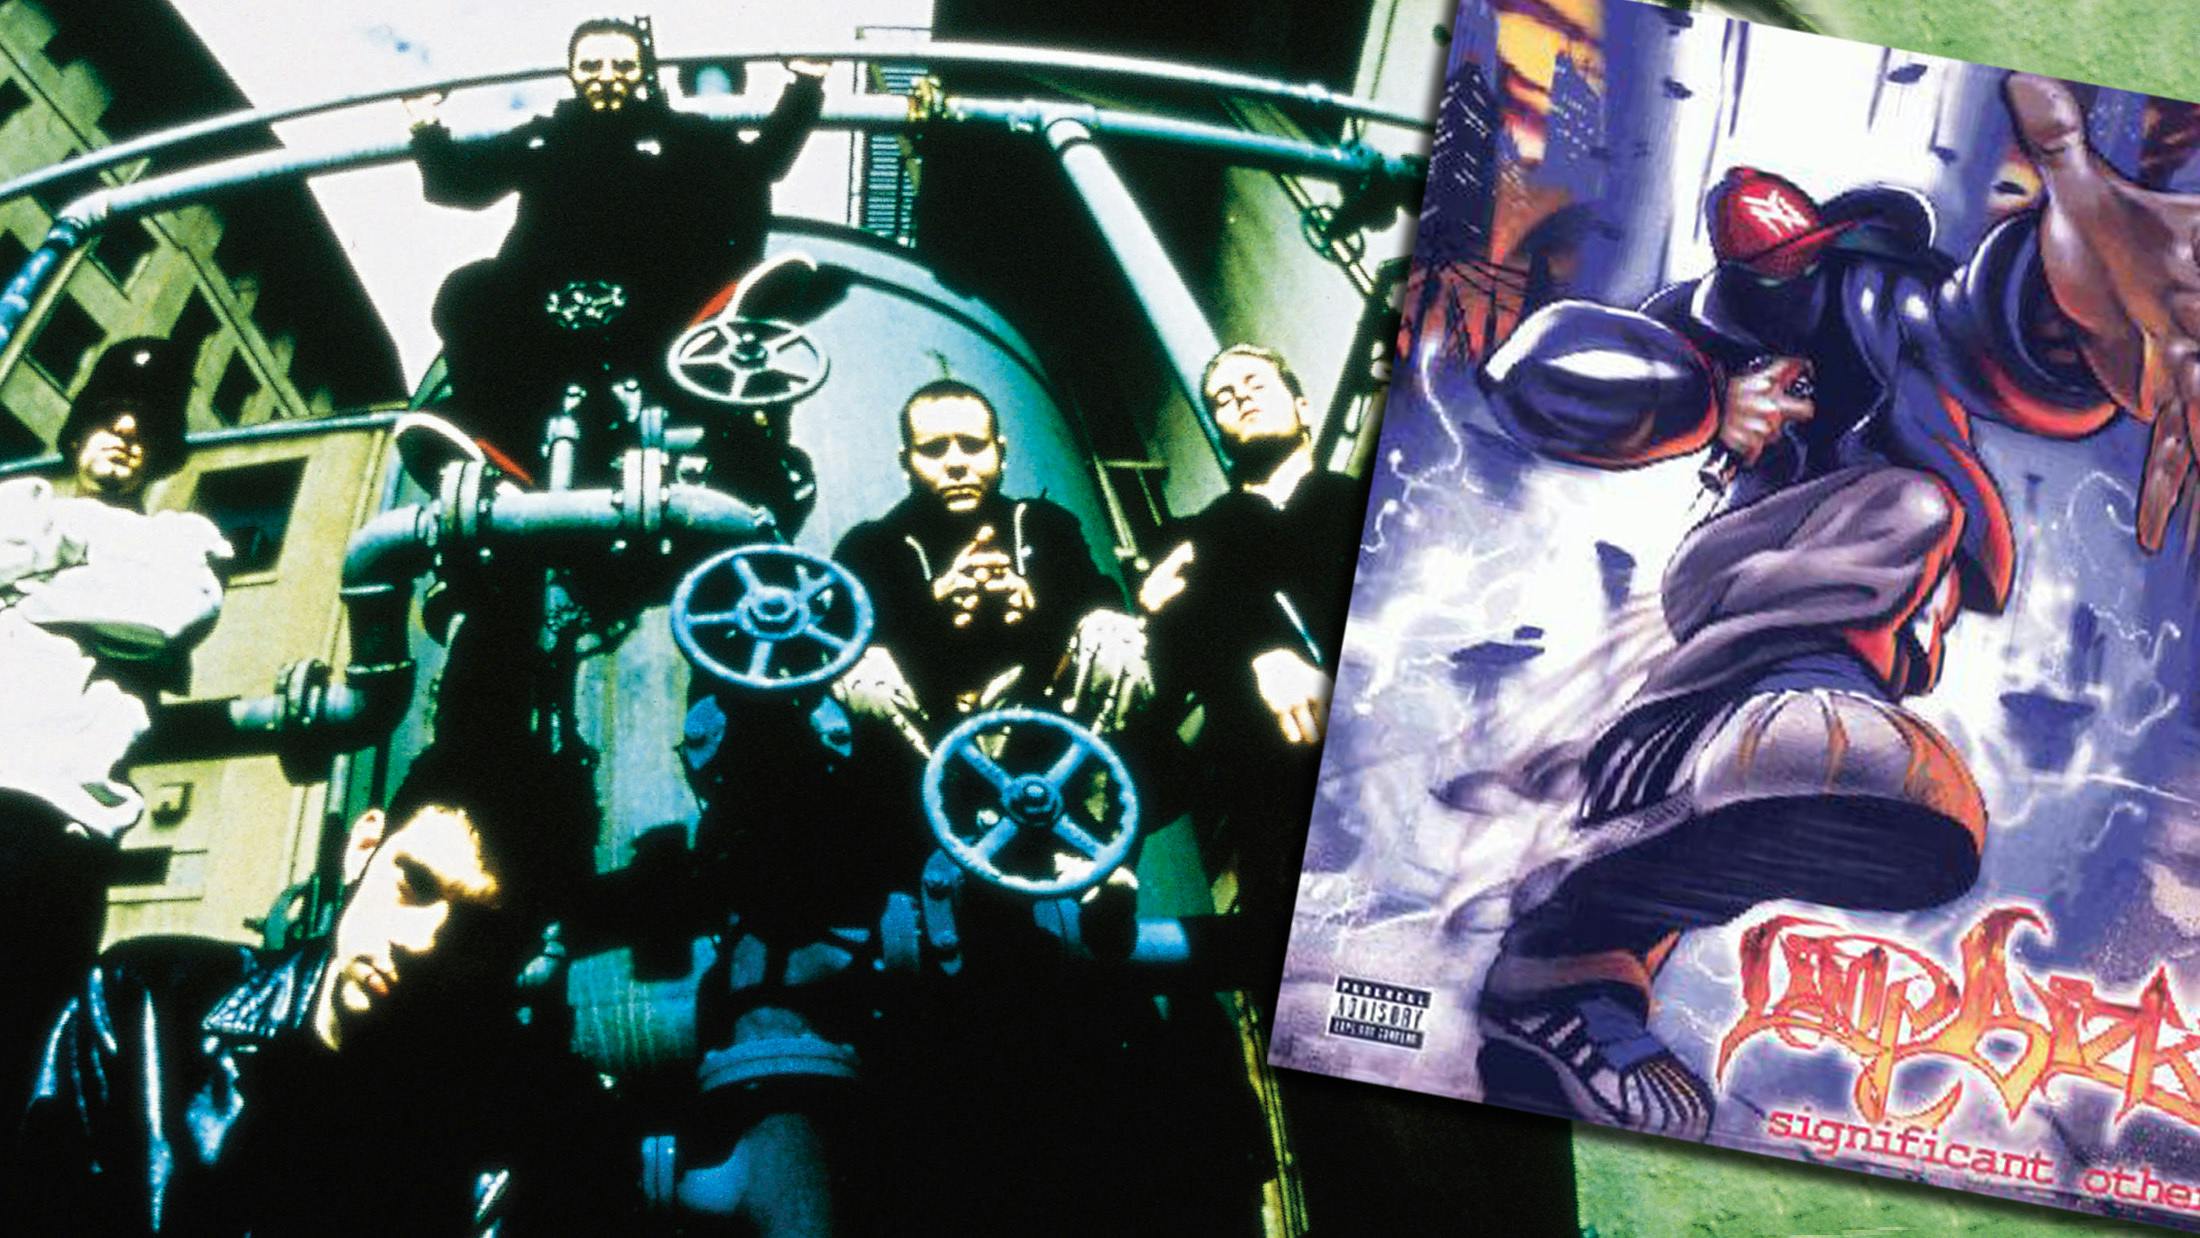 Limp Bizkit: How Significant Other saw the nu-metal anti-heroes take over the world